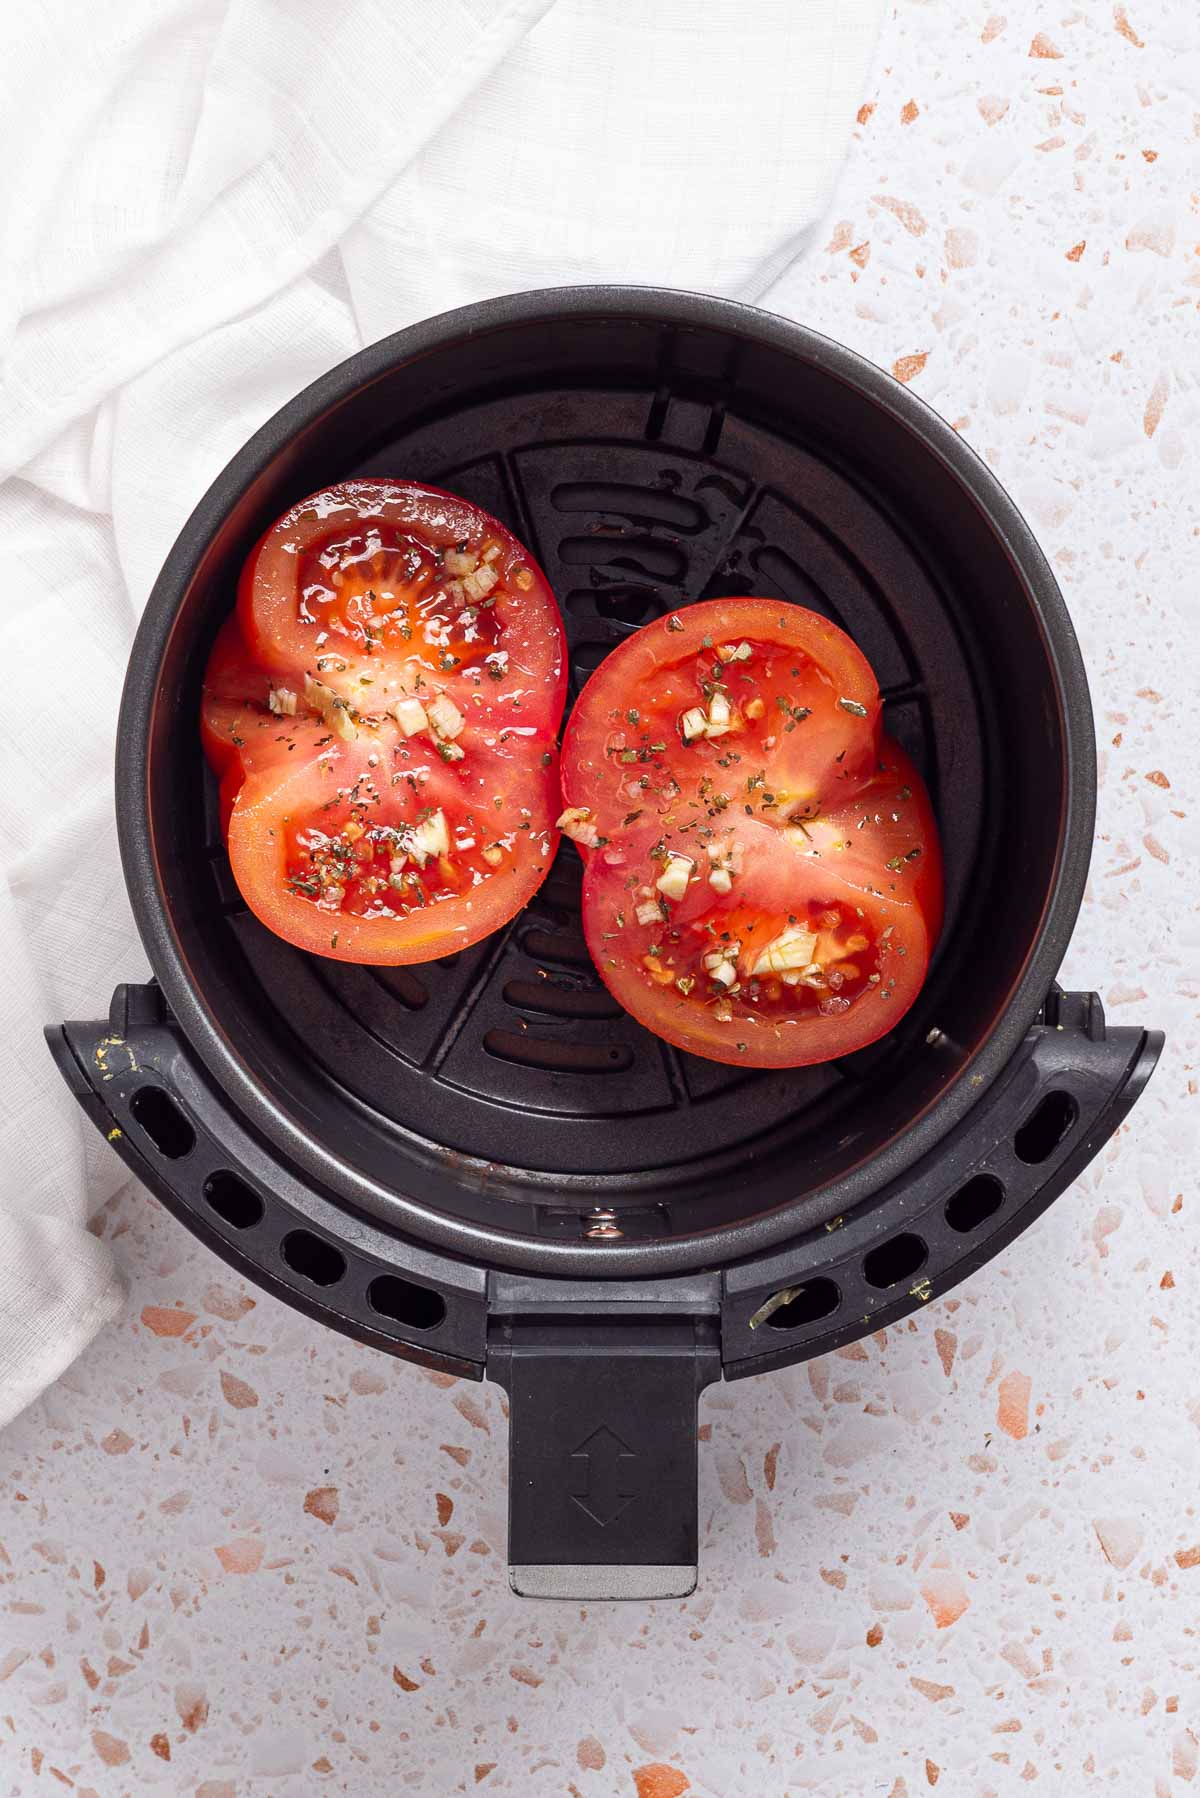 An air fryer with tomatoes in it.